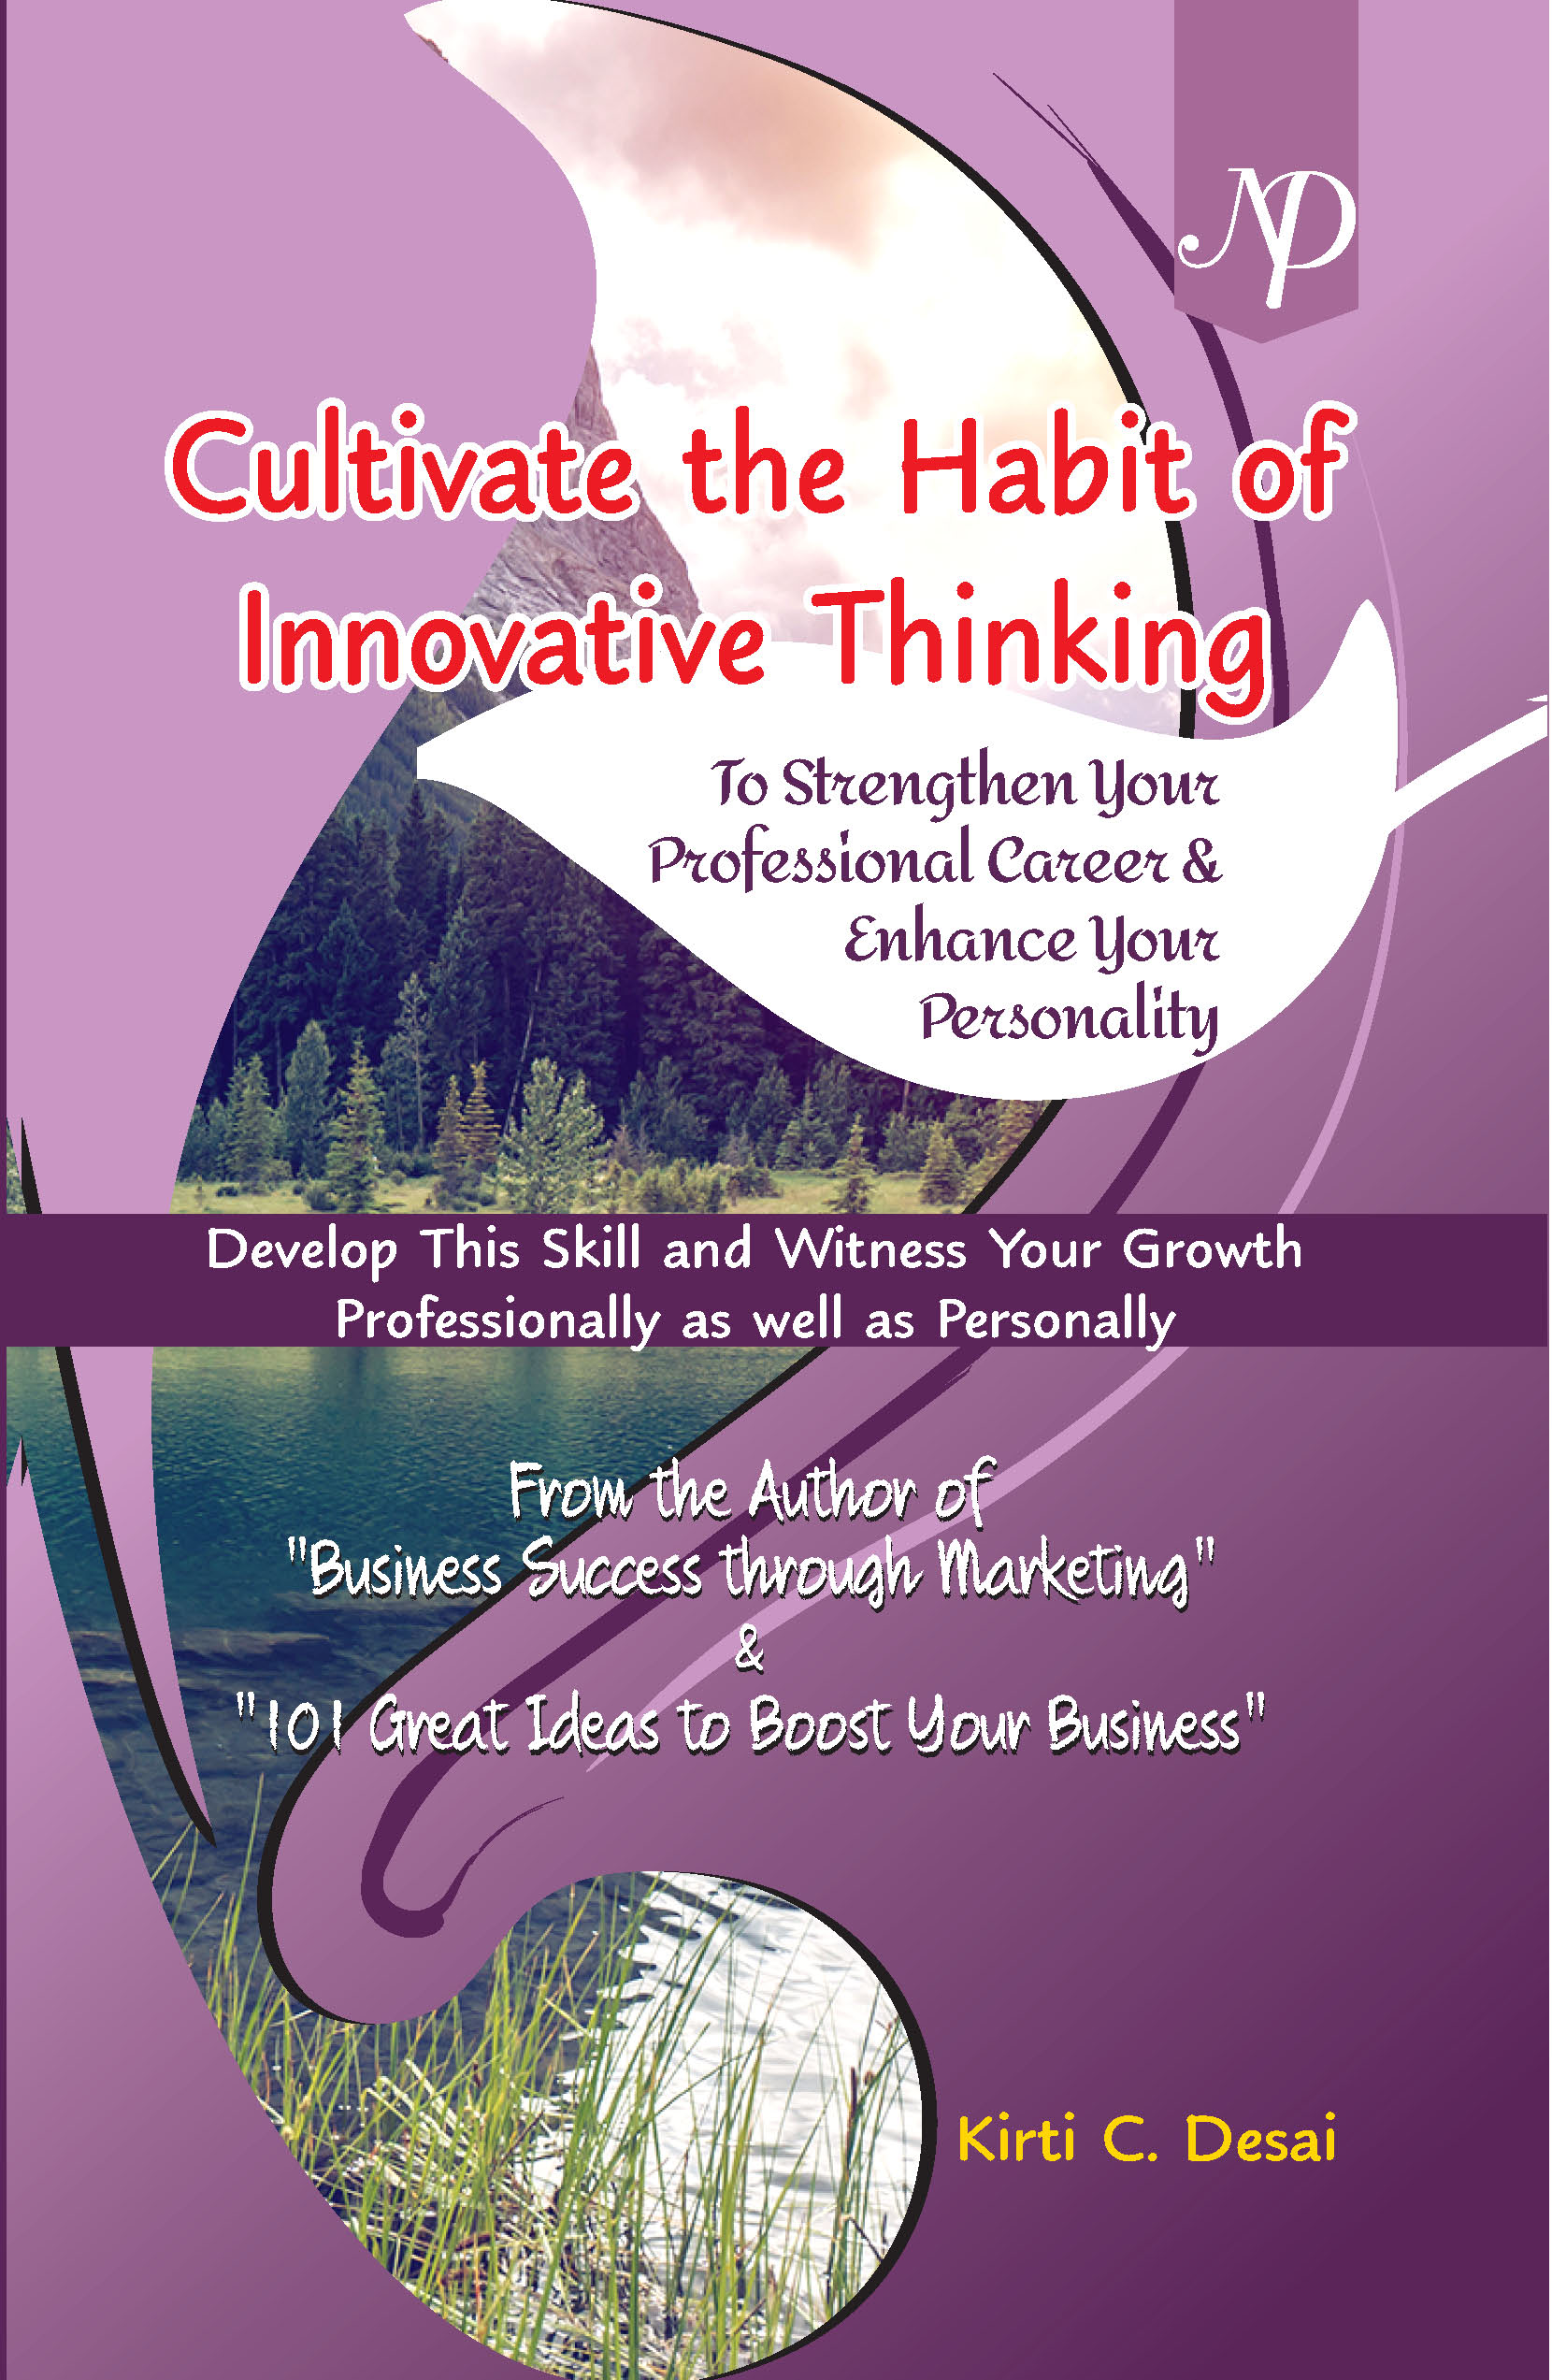 Cultivadte the habit of innovative thinking Cover.jpg